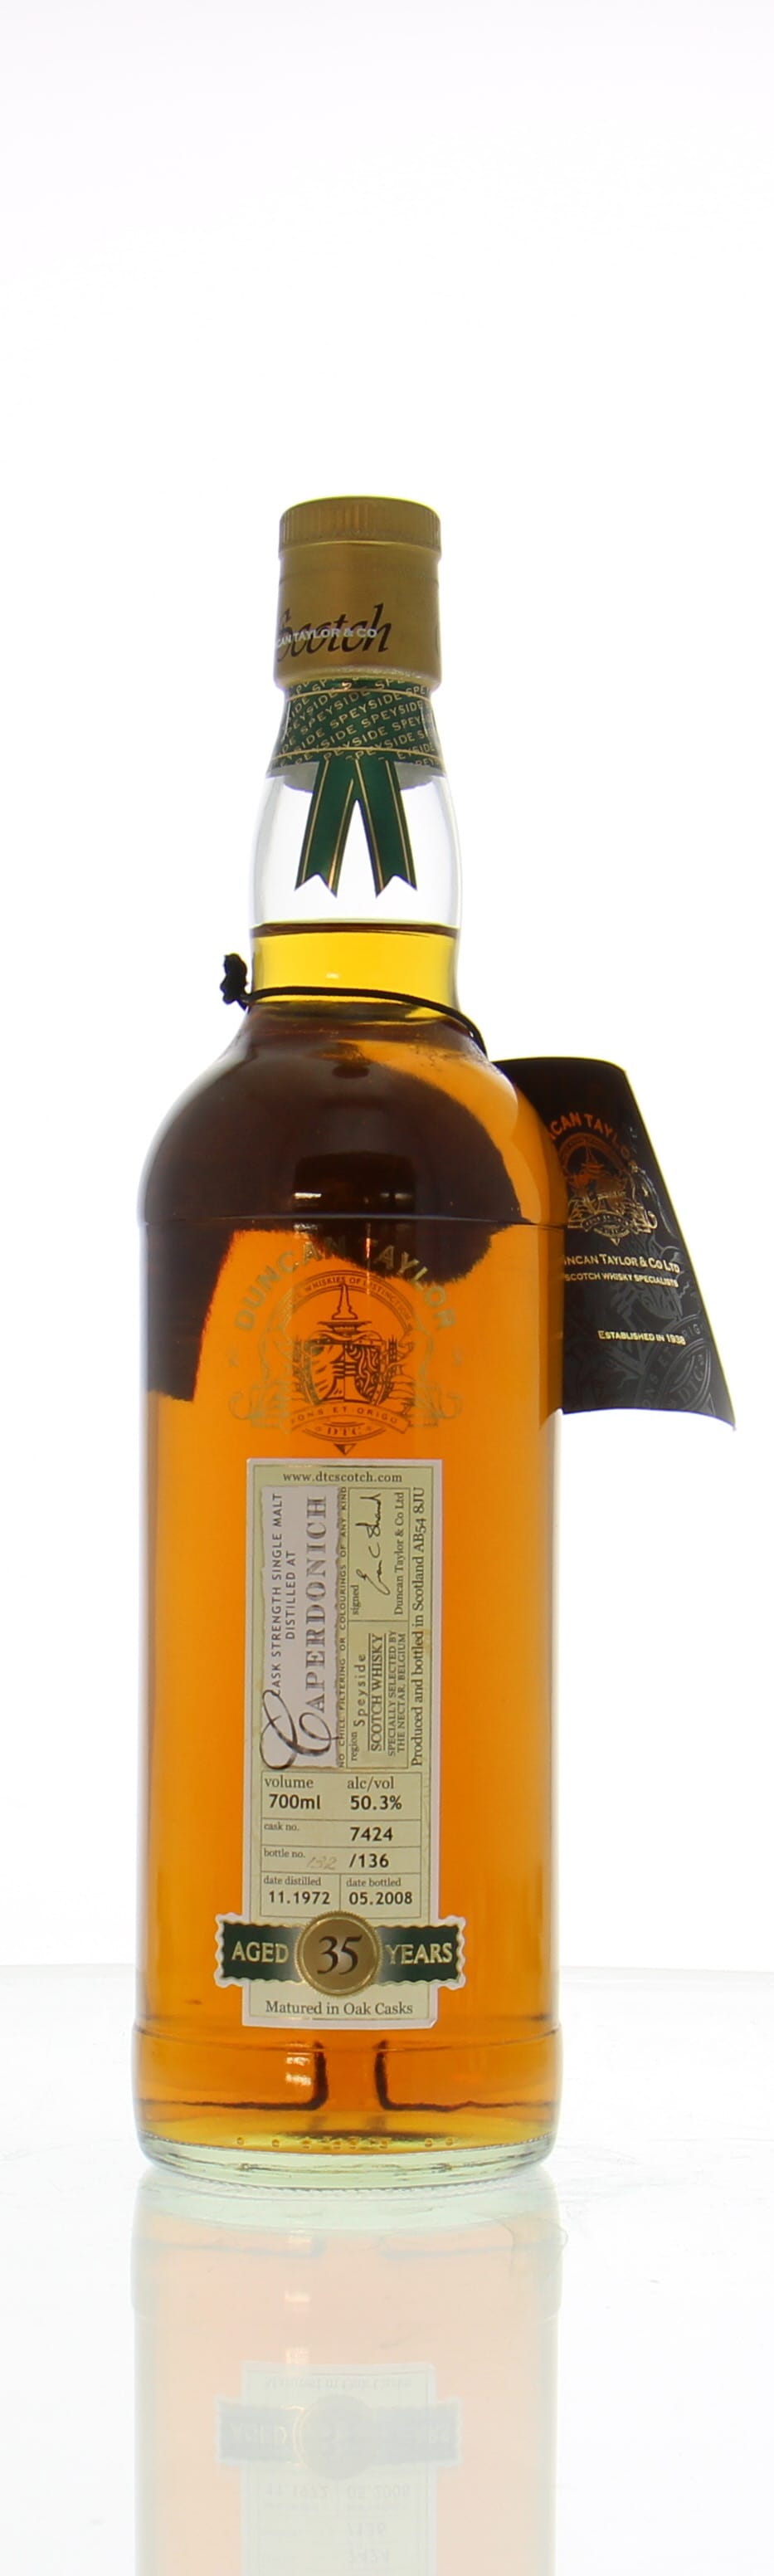 Caperdonich - 35 Years Old Duncan Taylor Cask:7424 50.3% 1972 NO BOX INCLUDED